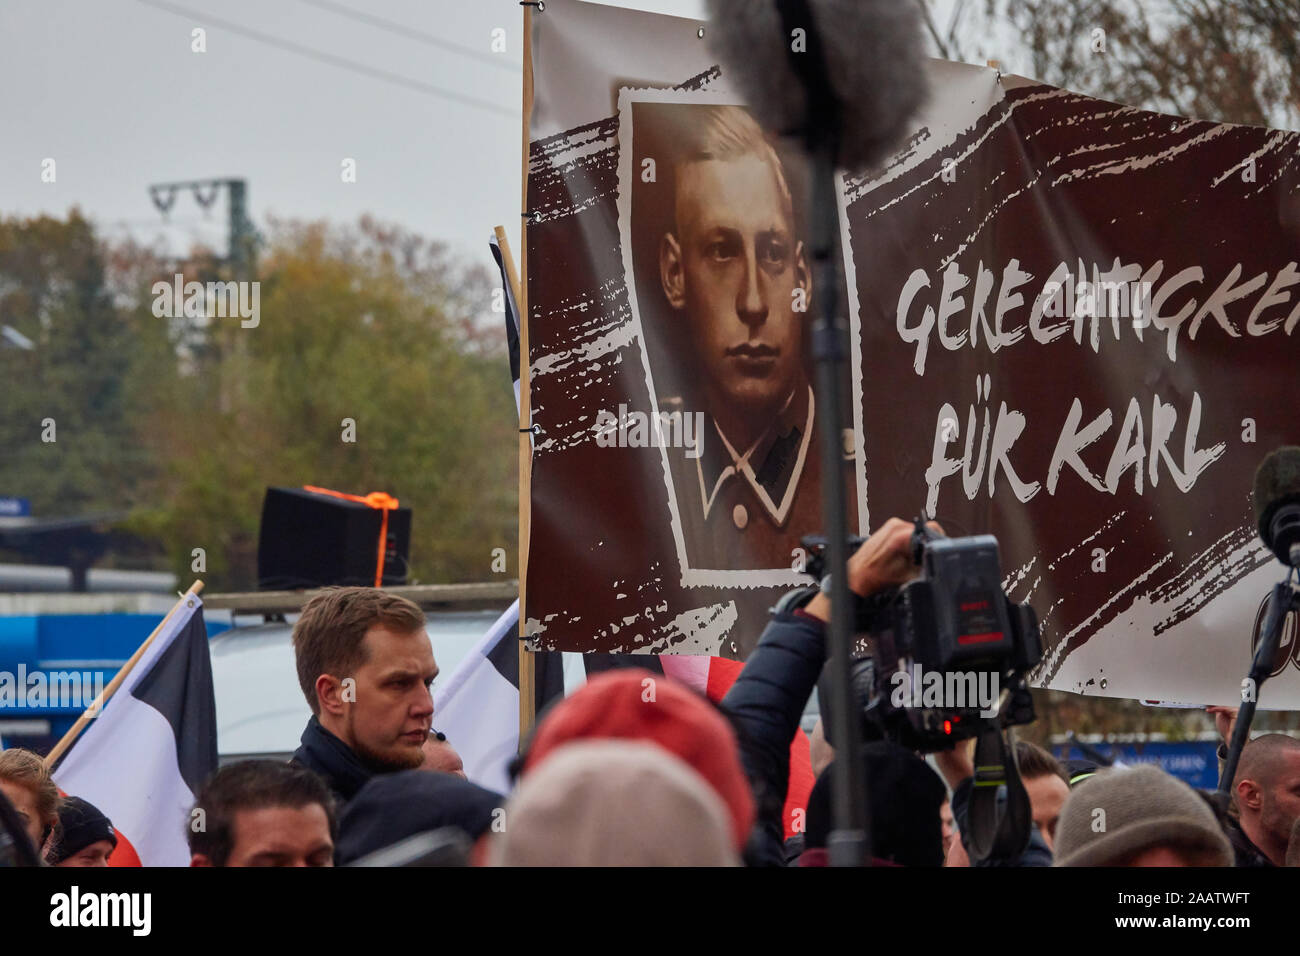 Hannover, Germany, November 23., 2019: Demonstration of the right-wing extremist National Socialist NPD with a brown poster promoting justice for a wa Stock Photo